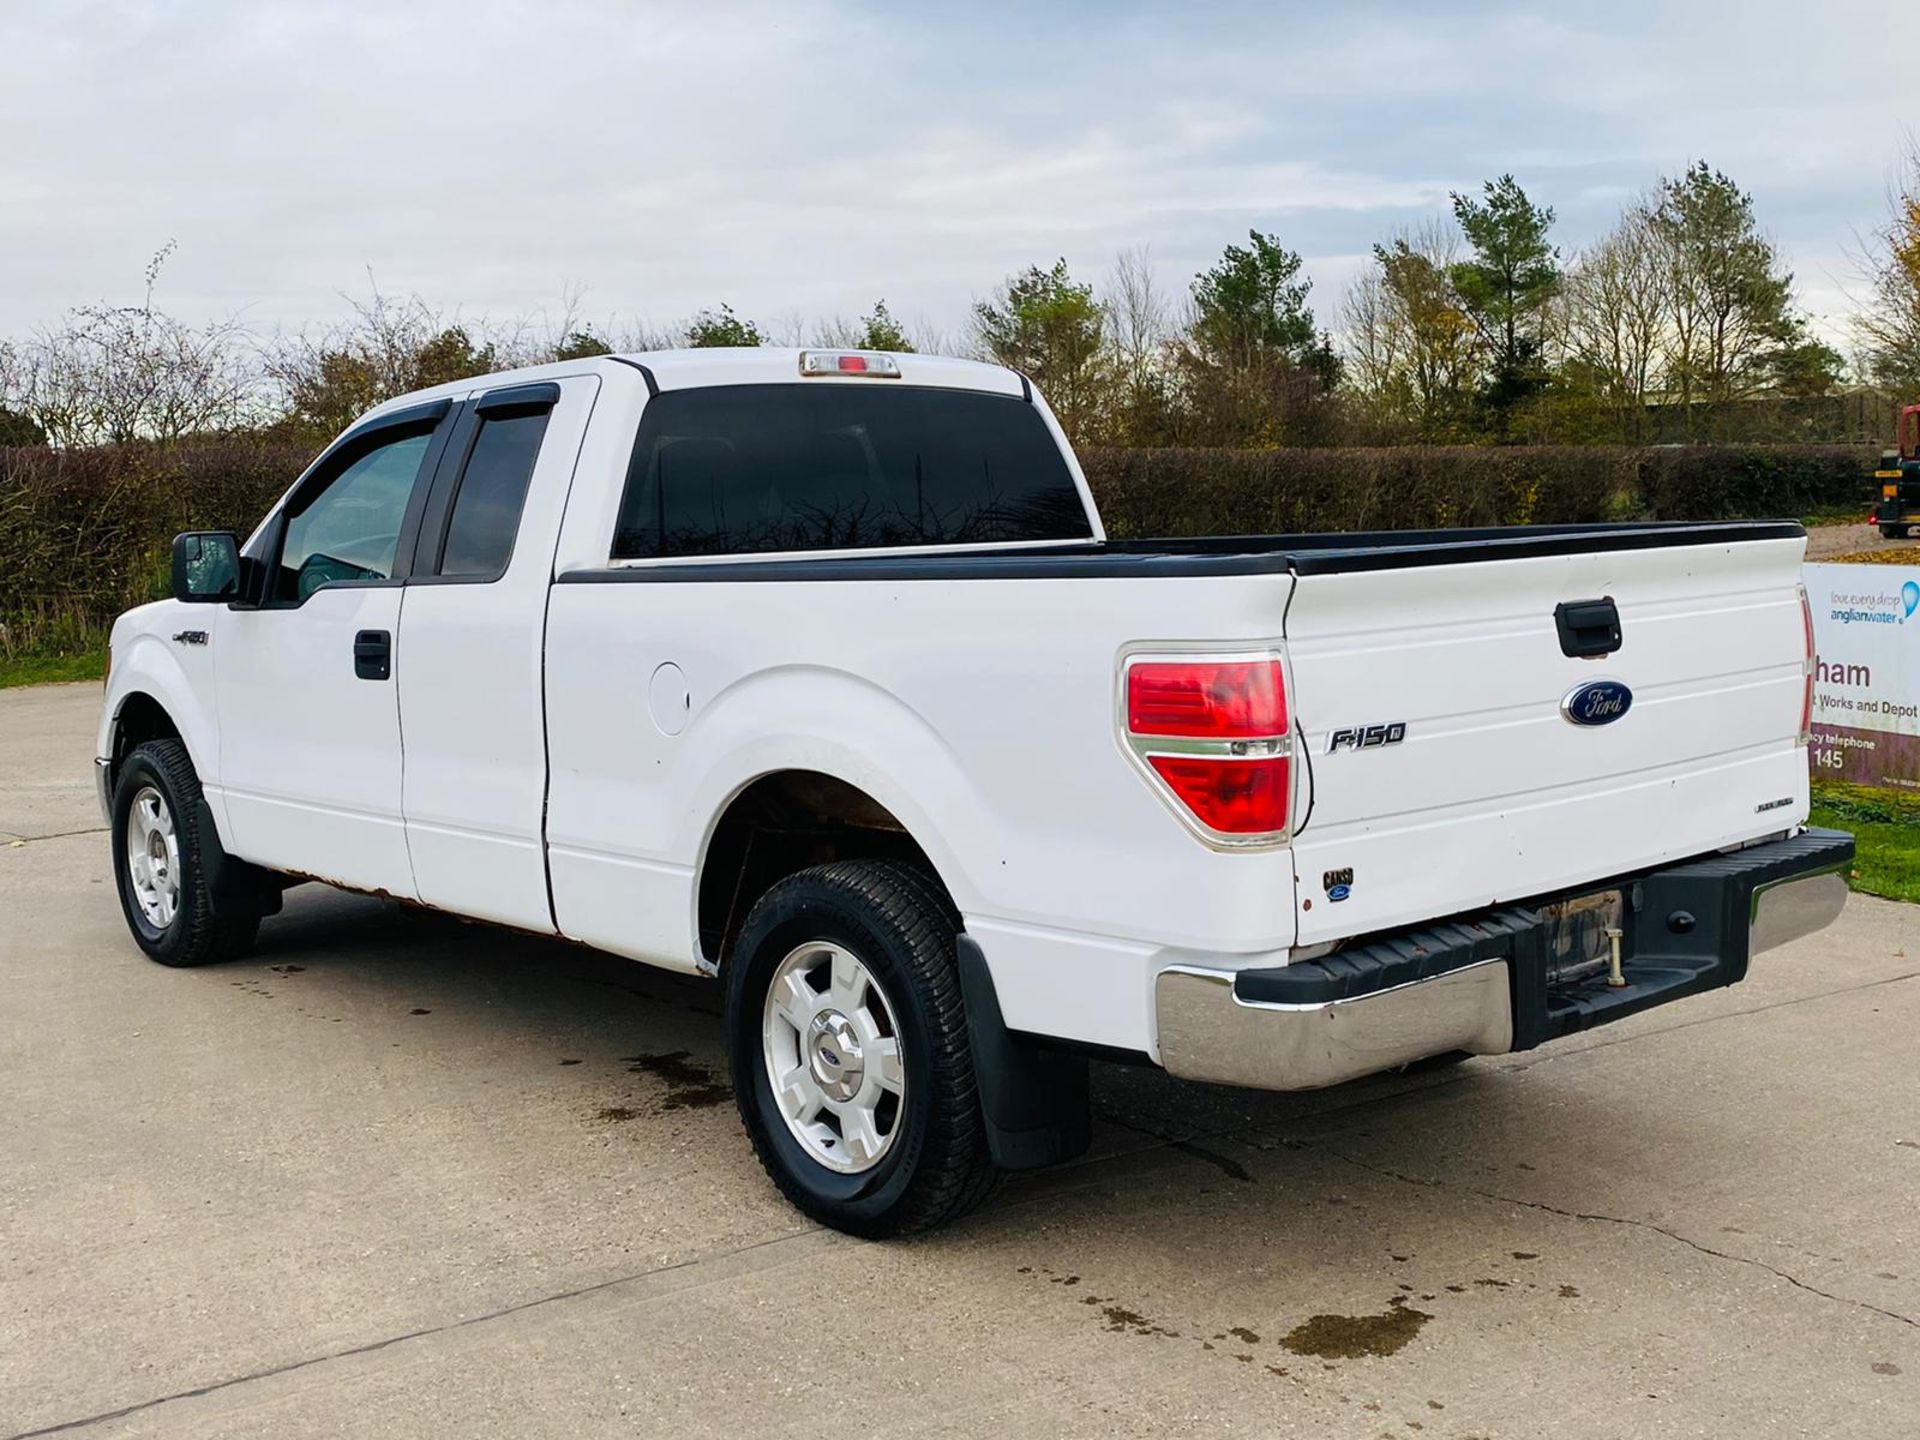 Ford F-150 XLT 3.7L V6 SuperCab - 2012 Year - 6 Seats - Air con - Fresh Import - - Image 11 of 24